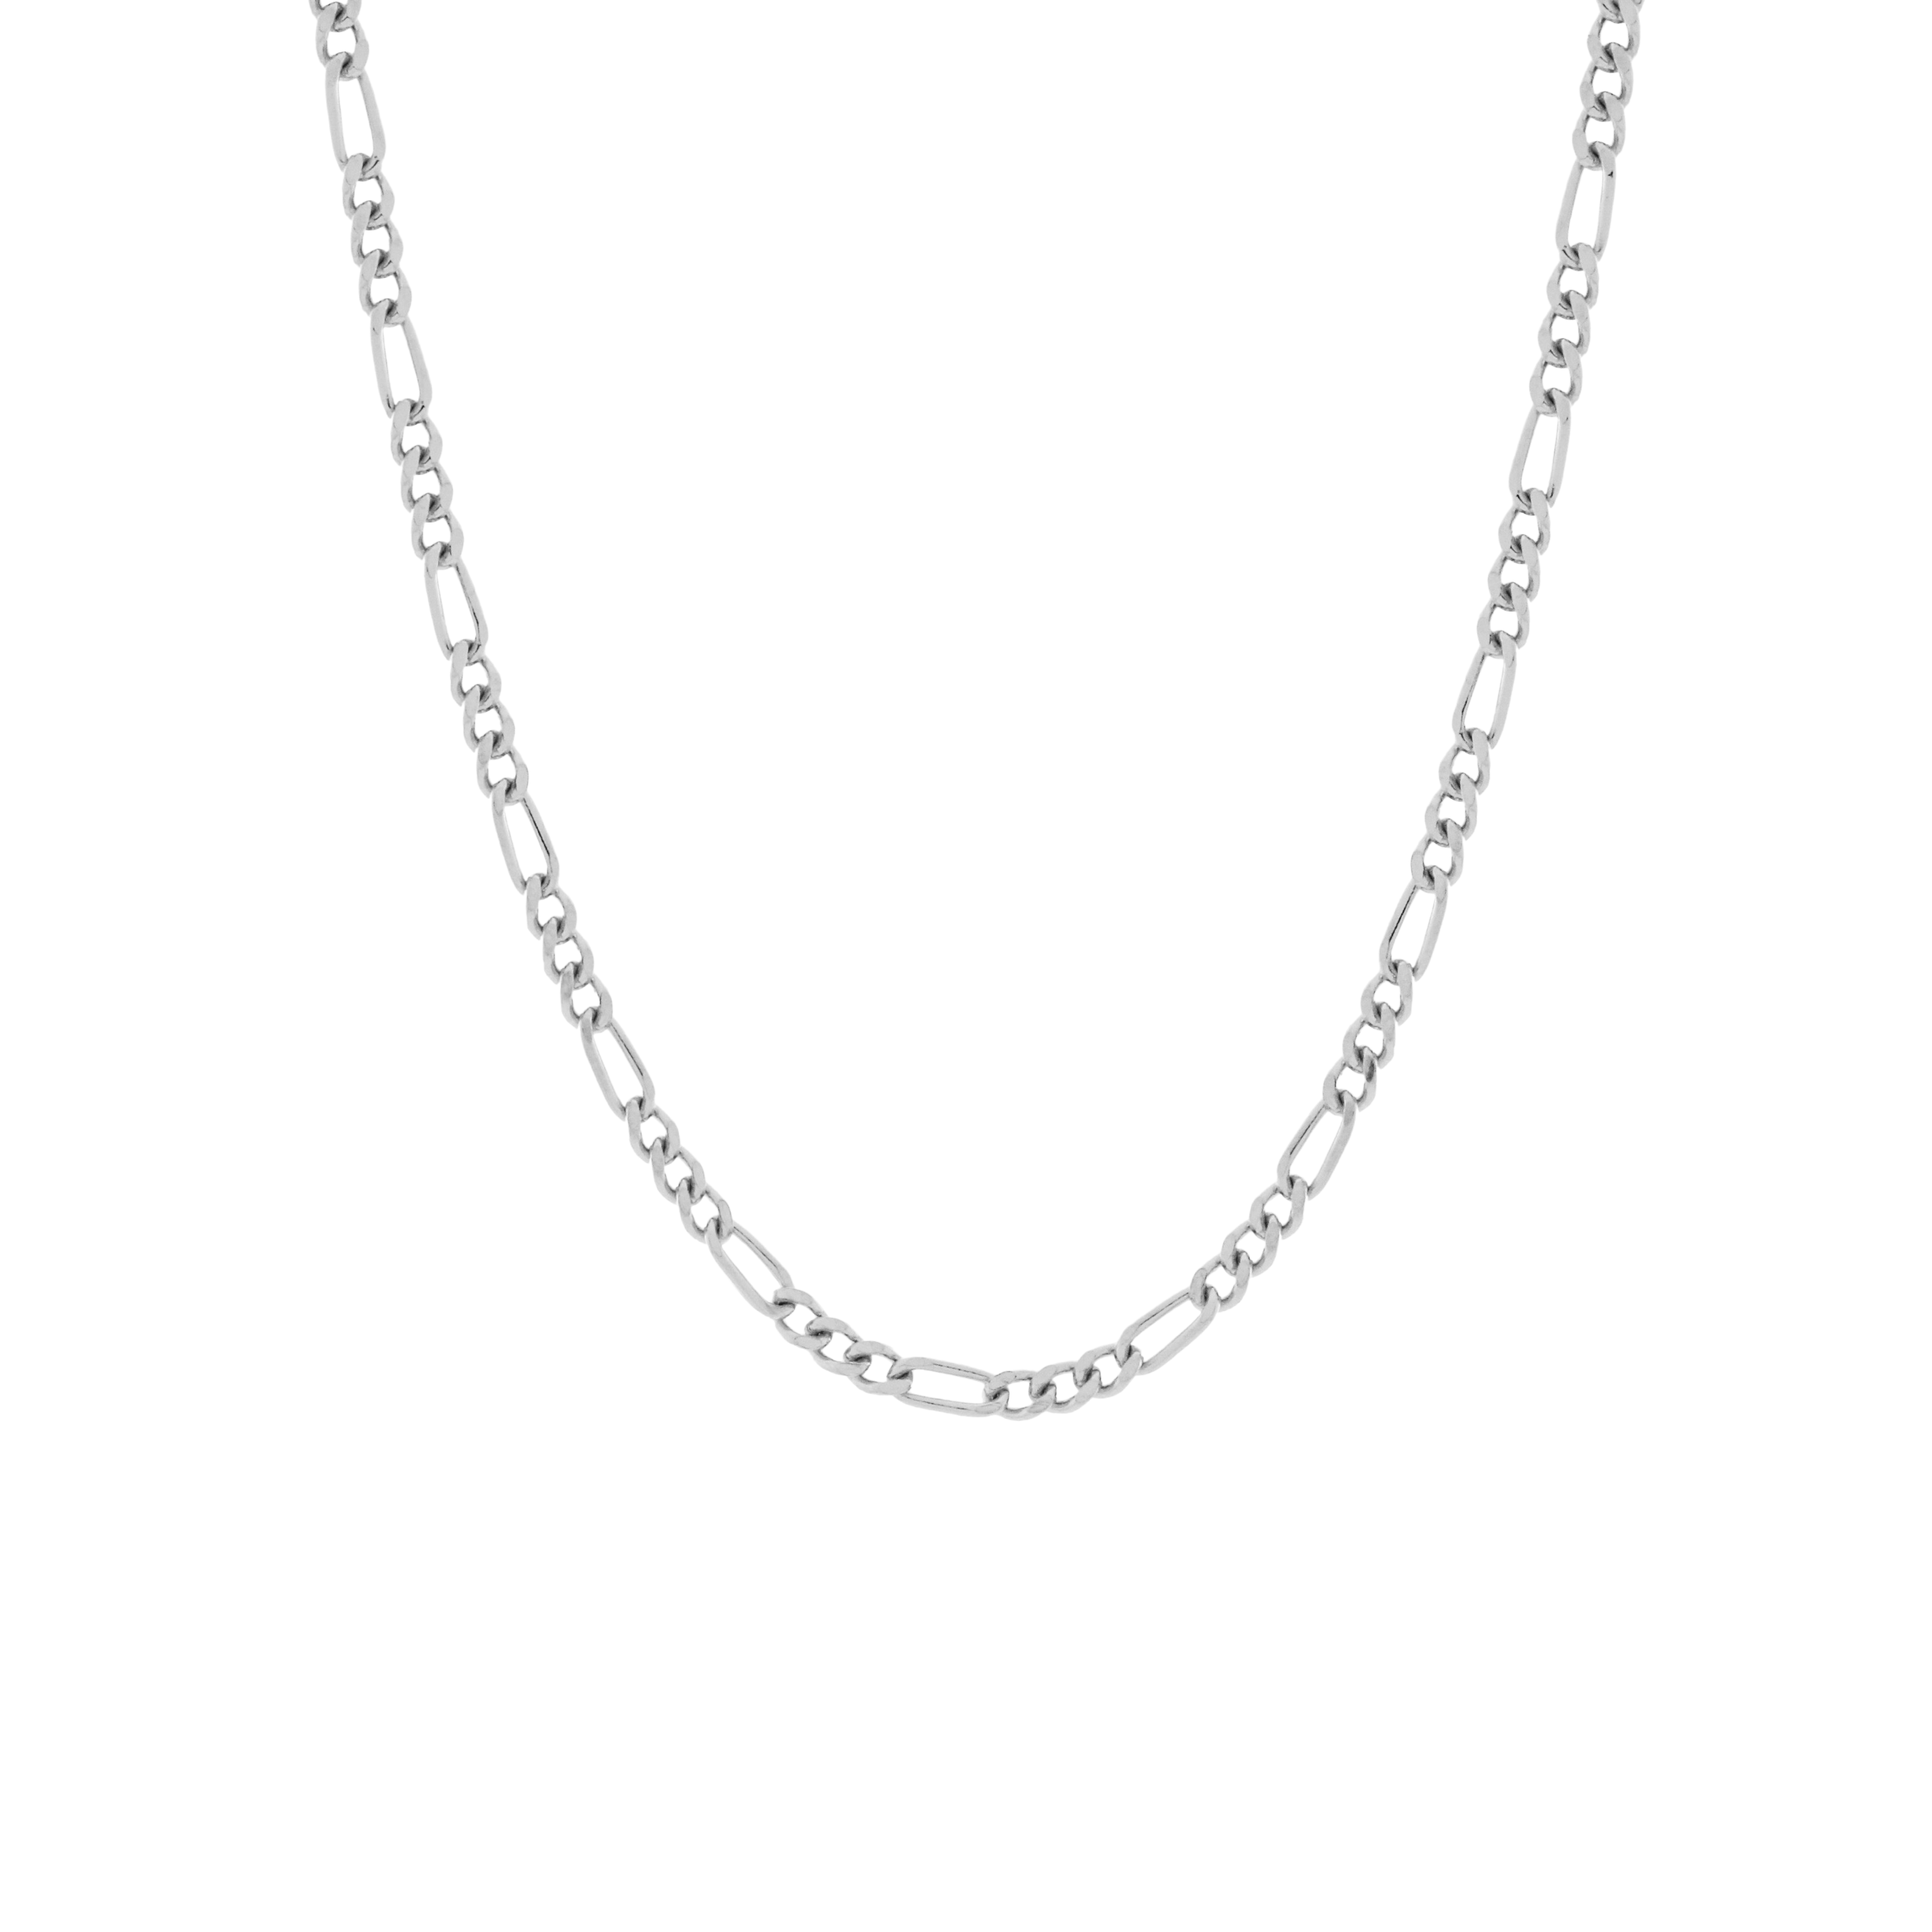 Best Layering Gold Chain Necklace Jewelry Gift | Best Aesthetic Yellow Gold  Chain Necklace Jewelry Gift for Women, Girls, Girlfriend, Mother, Wife -  Mason & Madison Co.